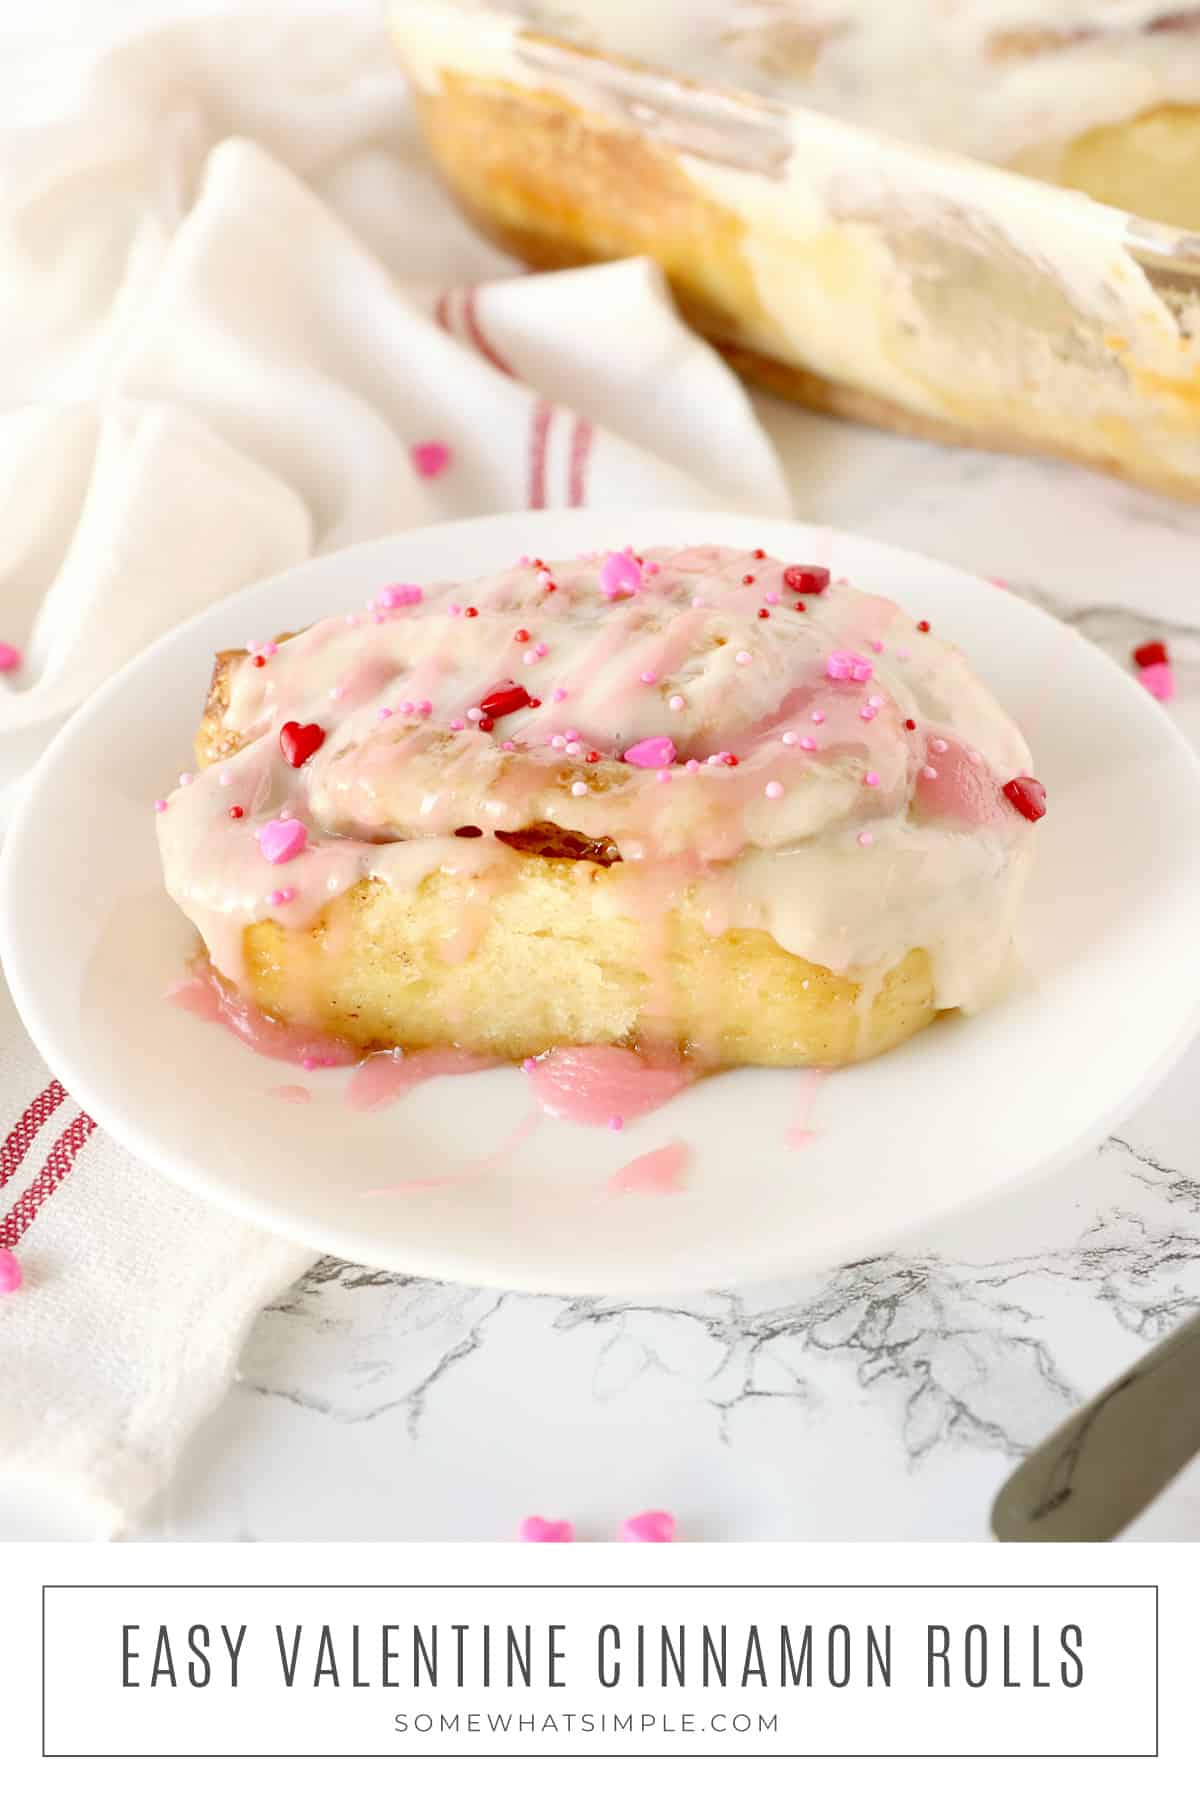 These easy-to-make Valentine's Cinnamon Rolls are a festive and delicious way to start the morning with someone you love! via @somewhatsimple